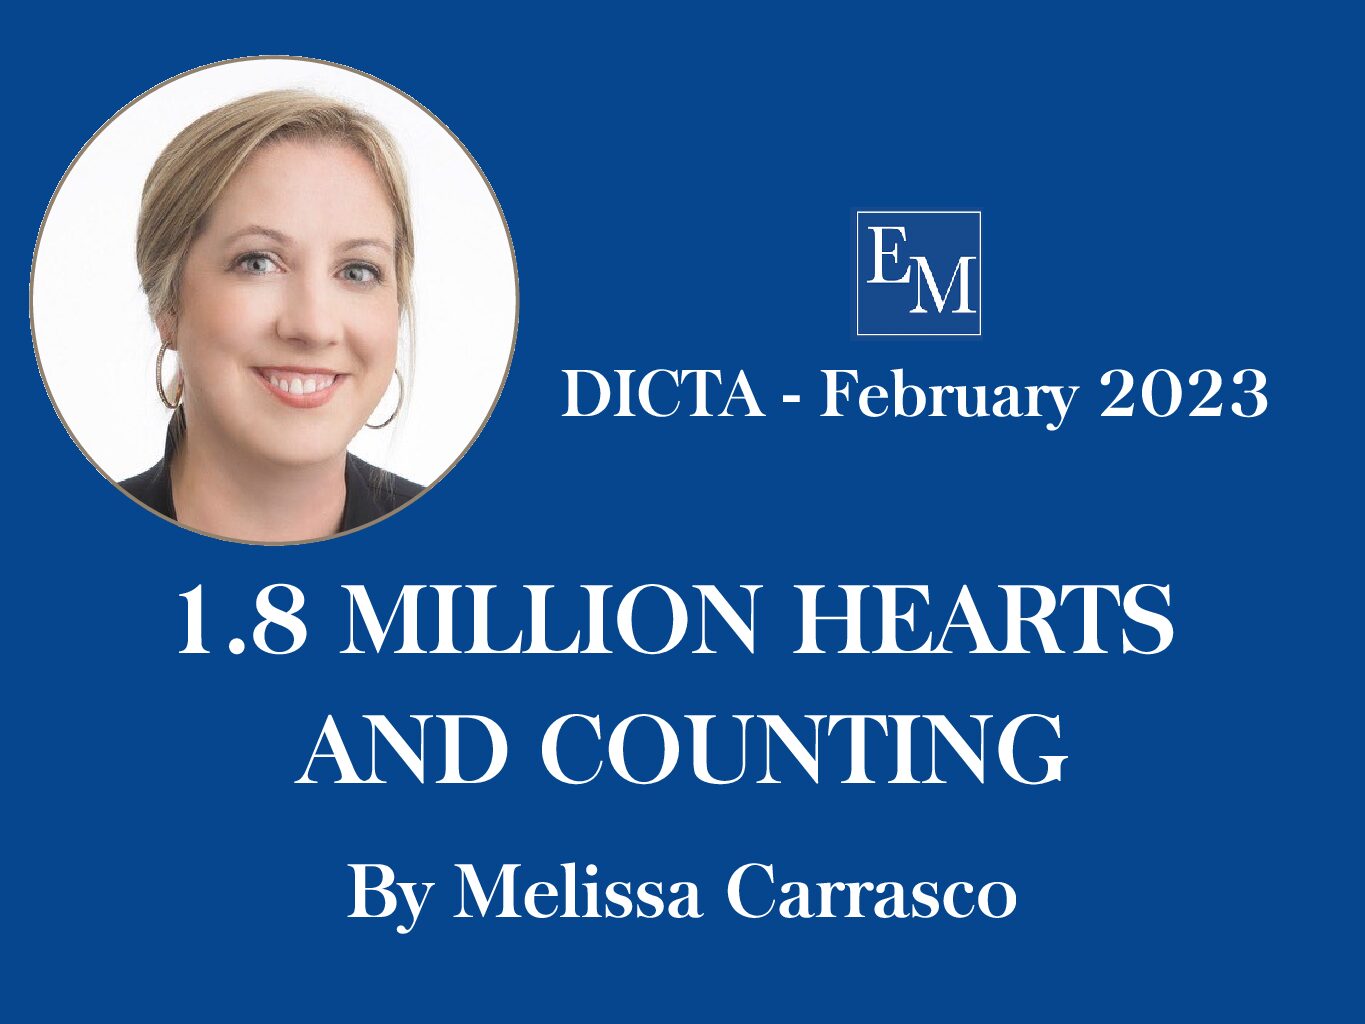 February DICTA Publication: 1.8 MILLION HEARTS AND COUNTING by Melissa Carrasco